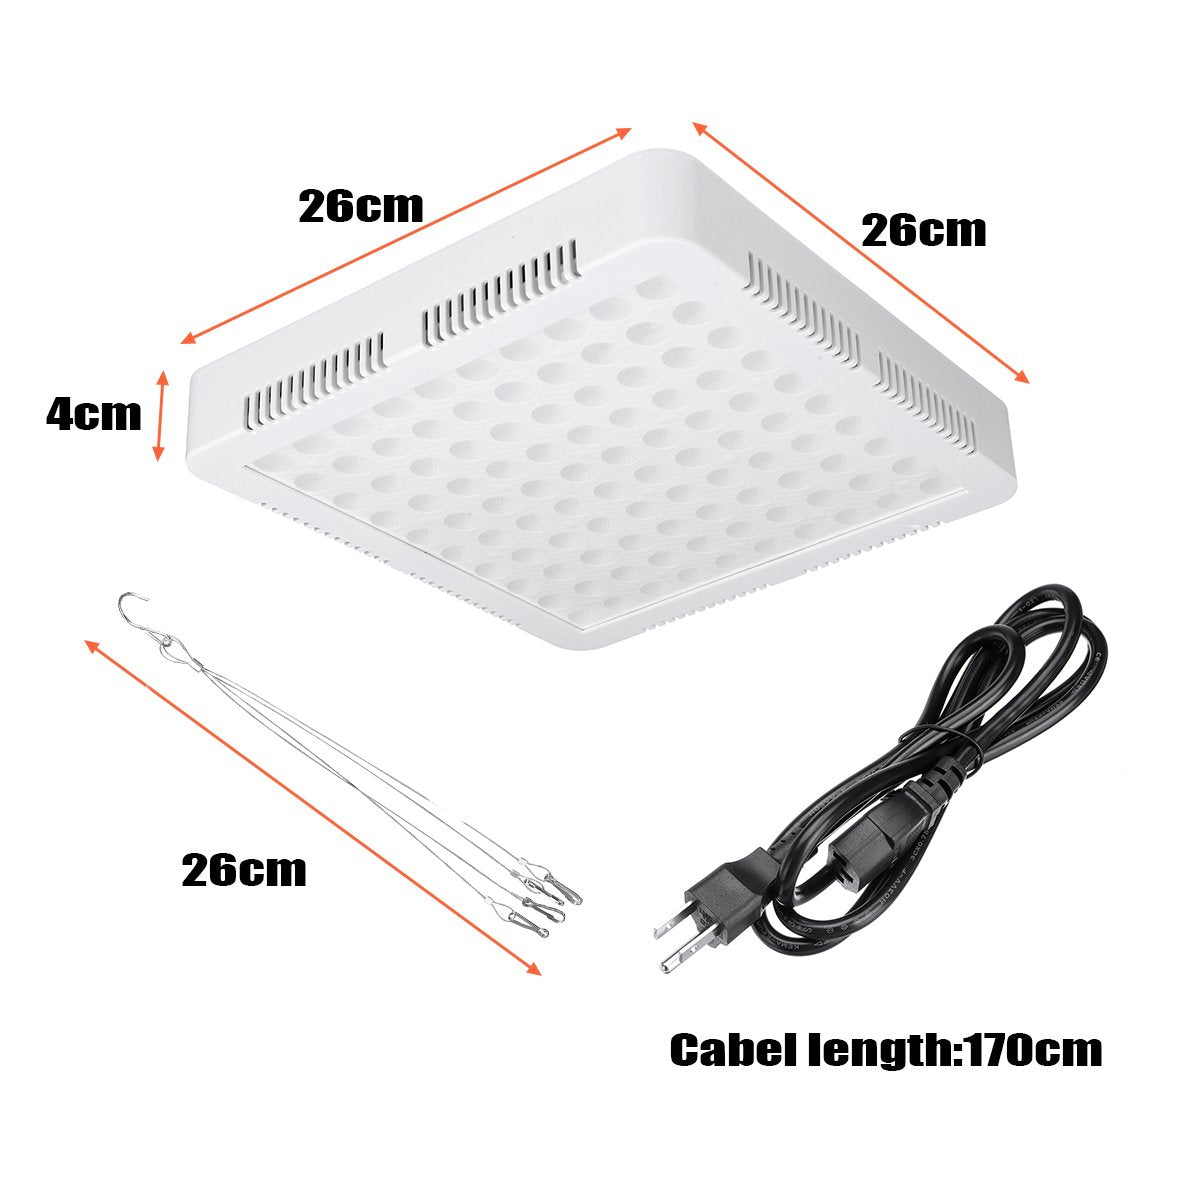 300W Spectrum LED Grow Light with Cooler Fan for Indoor Hydroponic Plant